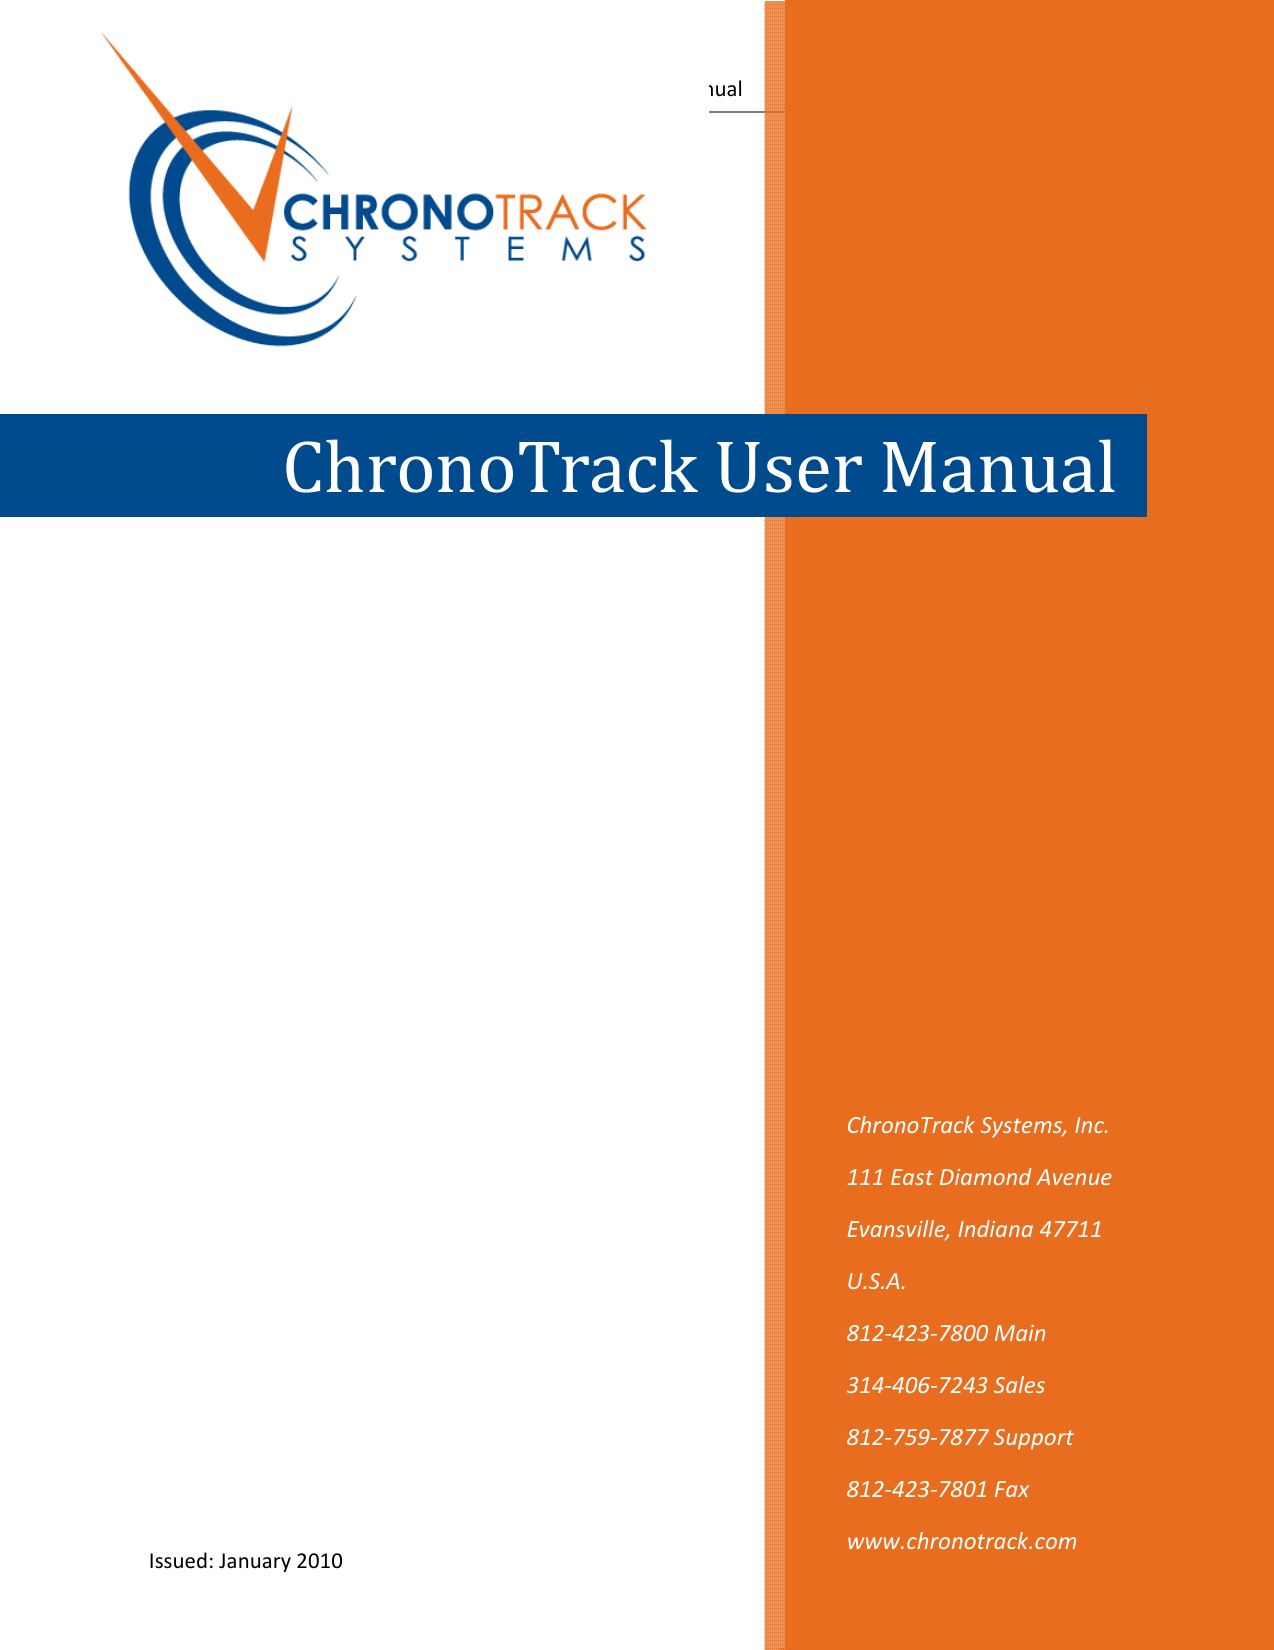 ChronoTrackSystems,Inc.ChronoTrackUserManualTableofContentsIssued:January2010  ChronoTrackSystems,Inc.111EastDiamondAvenueEvansville,Indiana47711U.S.A.812‐423‐7800Main314‐406‐7243Sales812‐759‐7877Support812‐423‐7801Faxwww.chronotrack.comChronoTrackUserManual